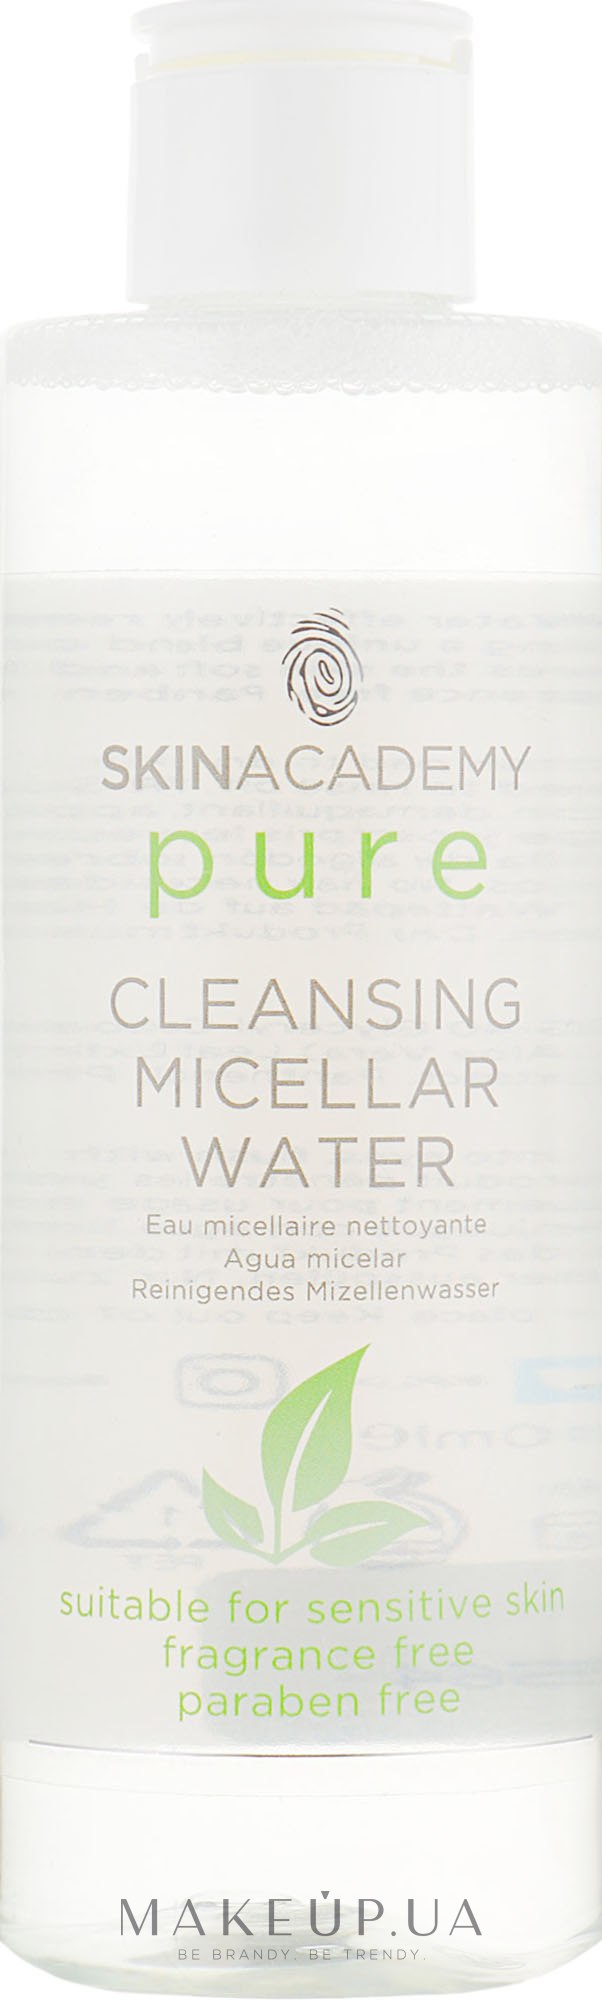 Мицеллярная вода - Details about Skin Academy Pure Cleansing Micellar Water — фото 200ml